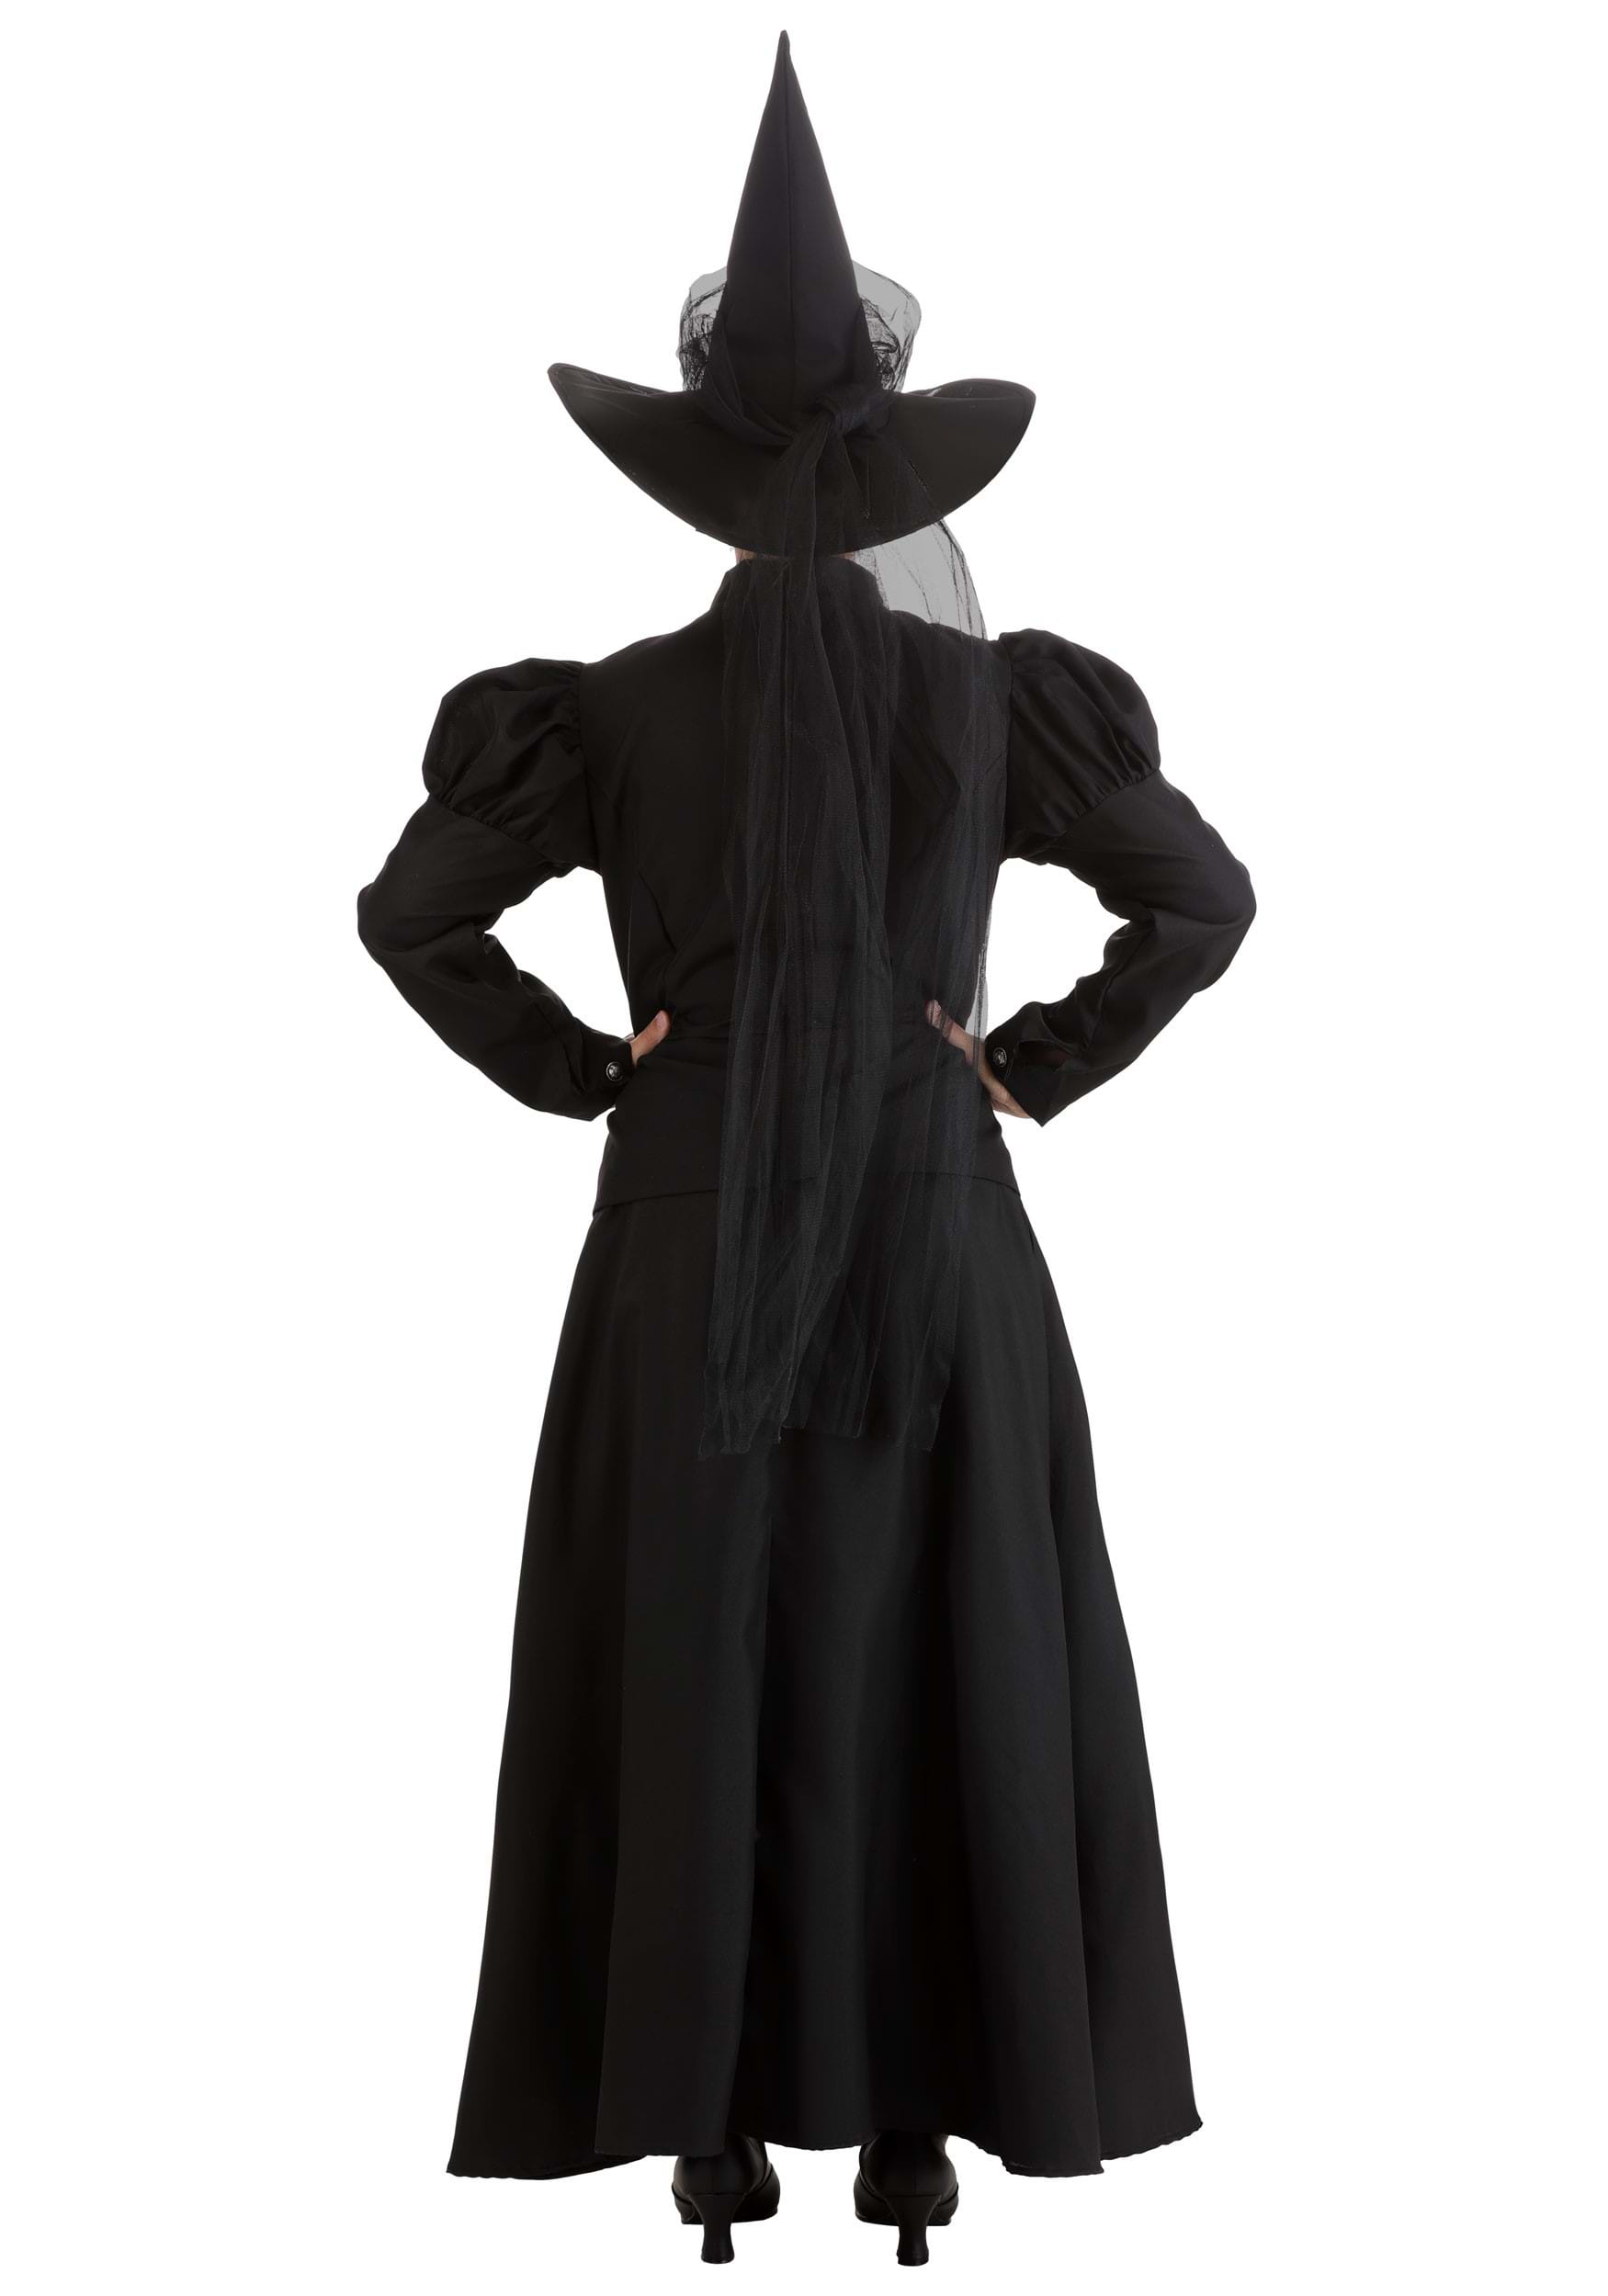 https://images.halloweencostumes.ca/products/5143/2-1-182591/womens-witch-deluxe-costume-alt-2.JPG